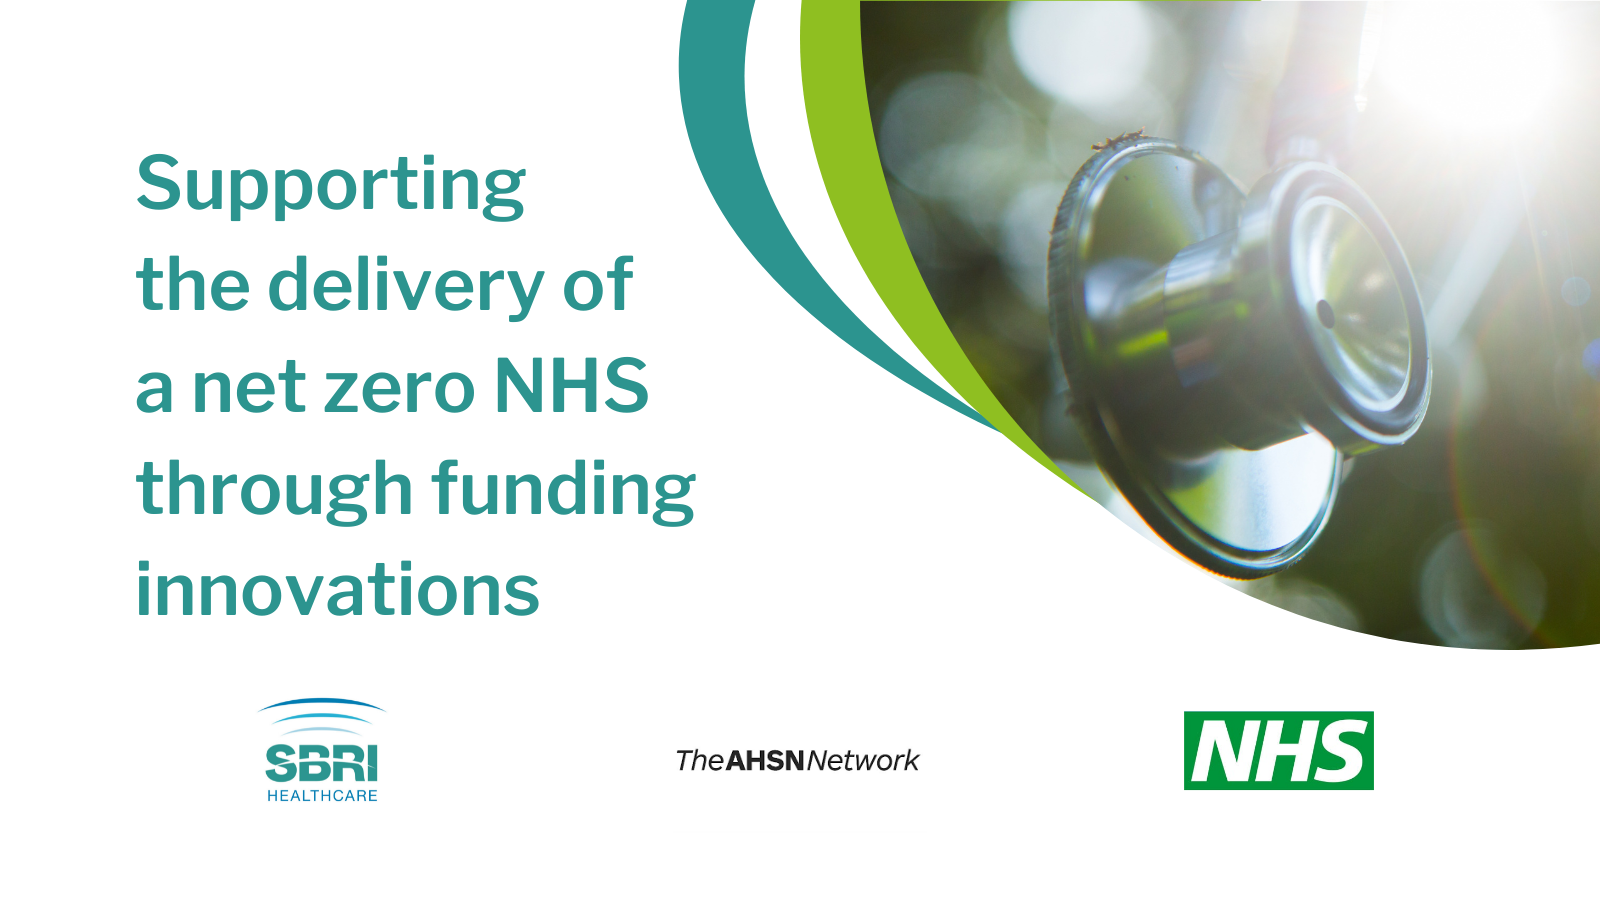 SBRI Healthcare awards £1 Million to pioneering innovations to support delivery of a net zero NHS